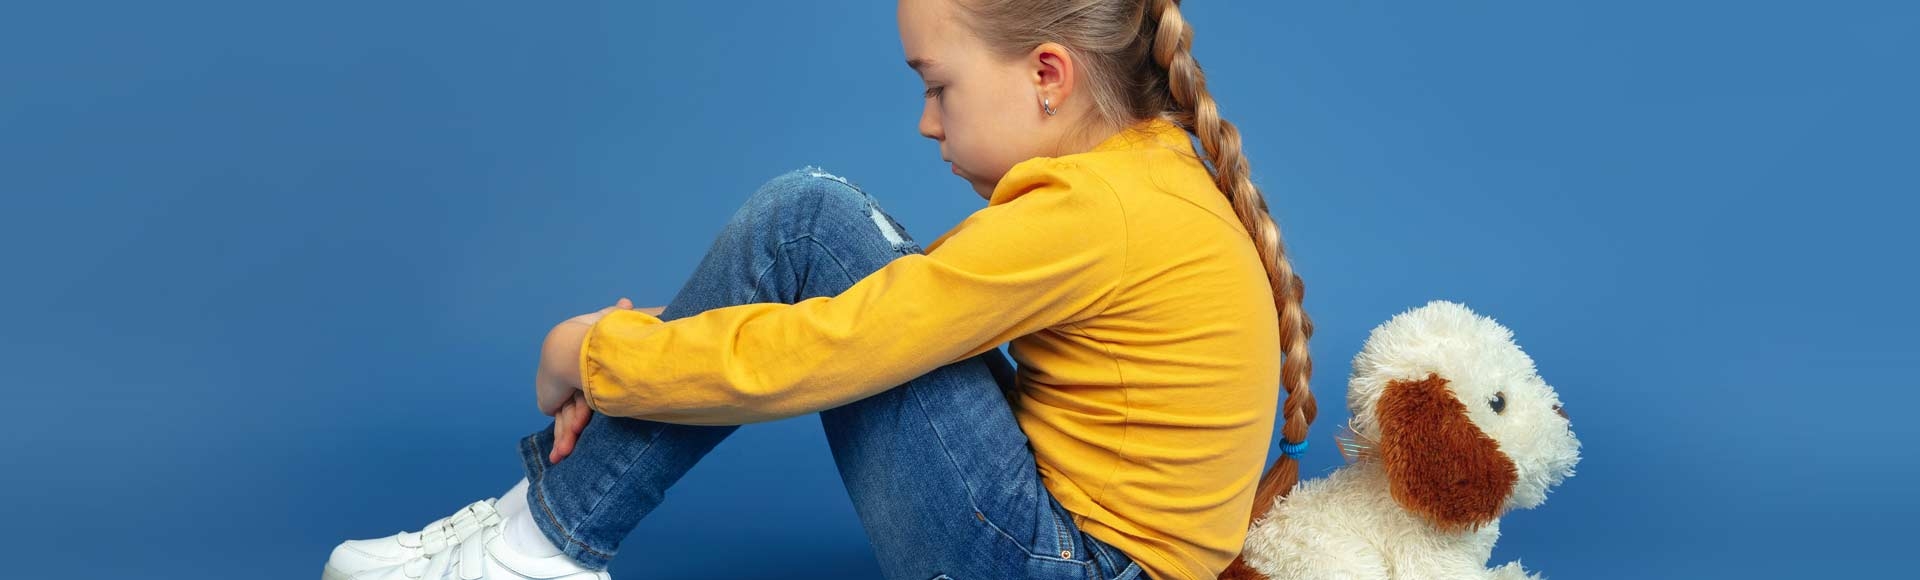 Strategies for Helping Kids Cope With Loneliness